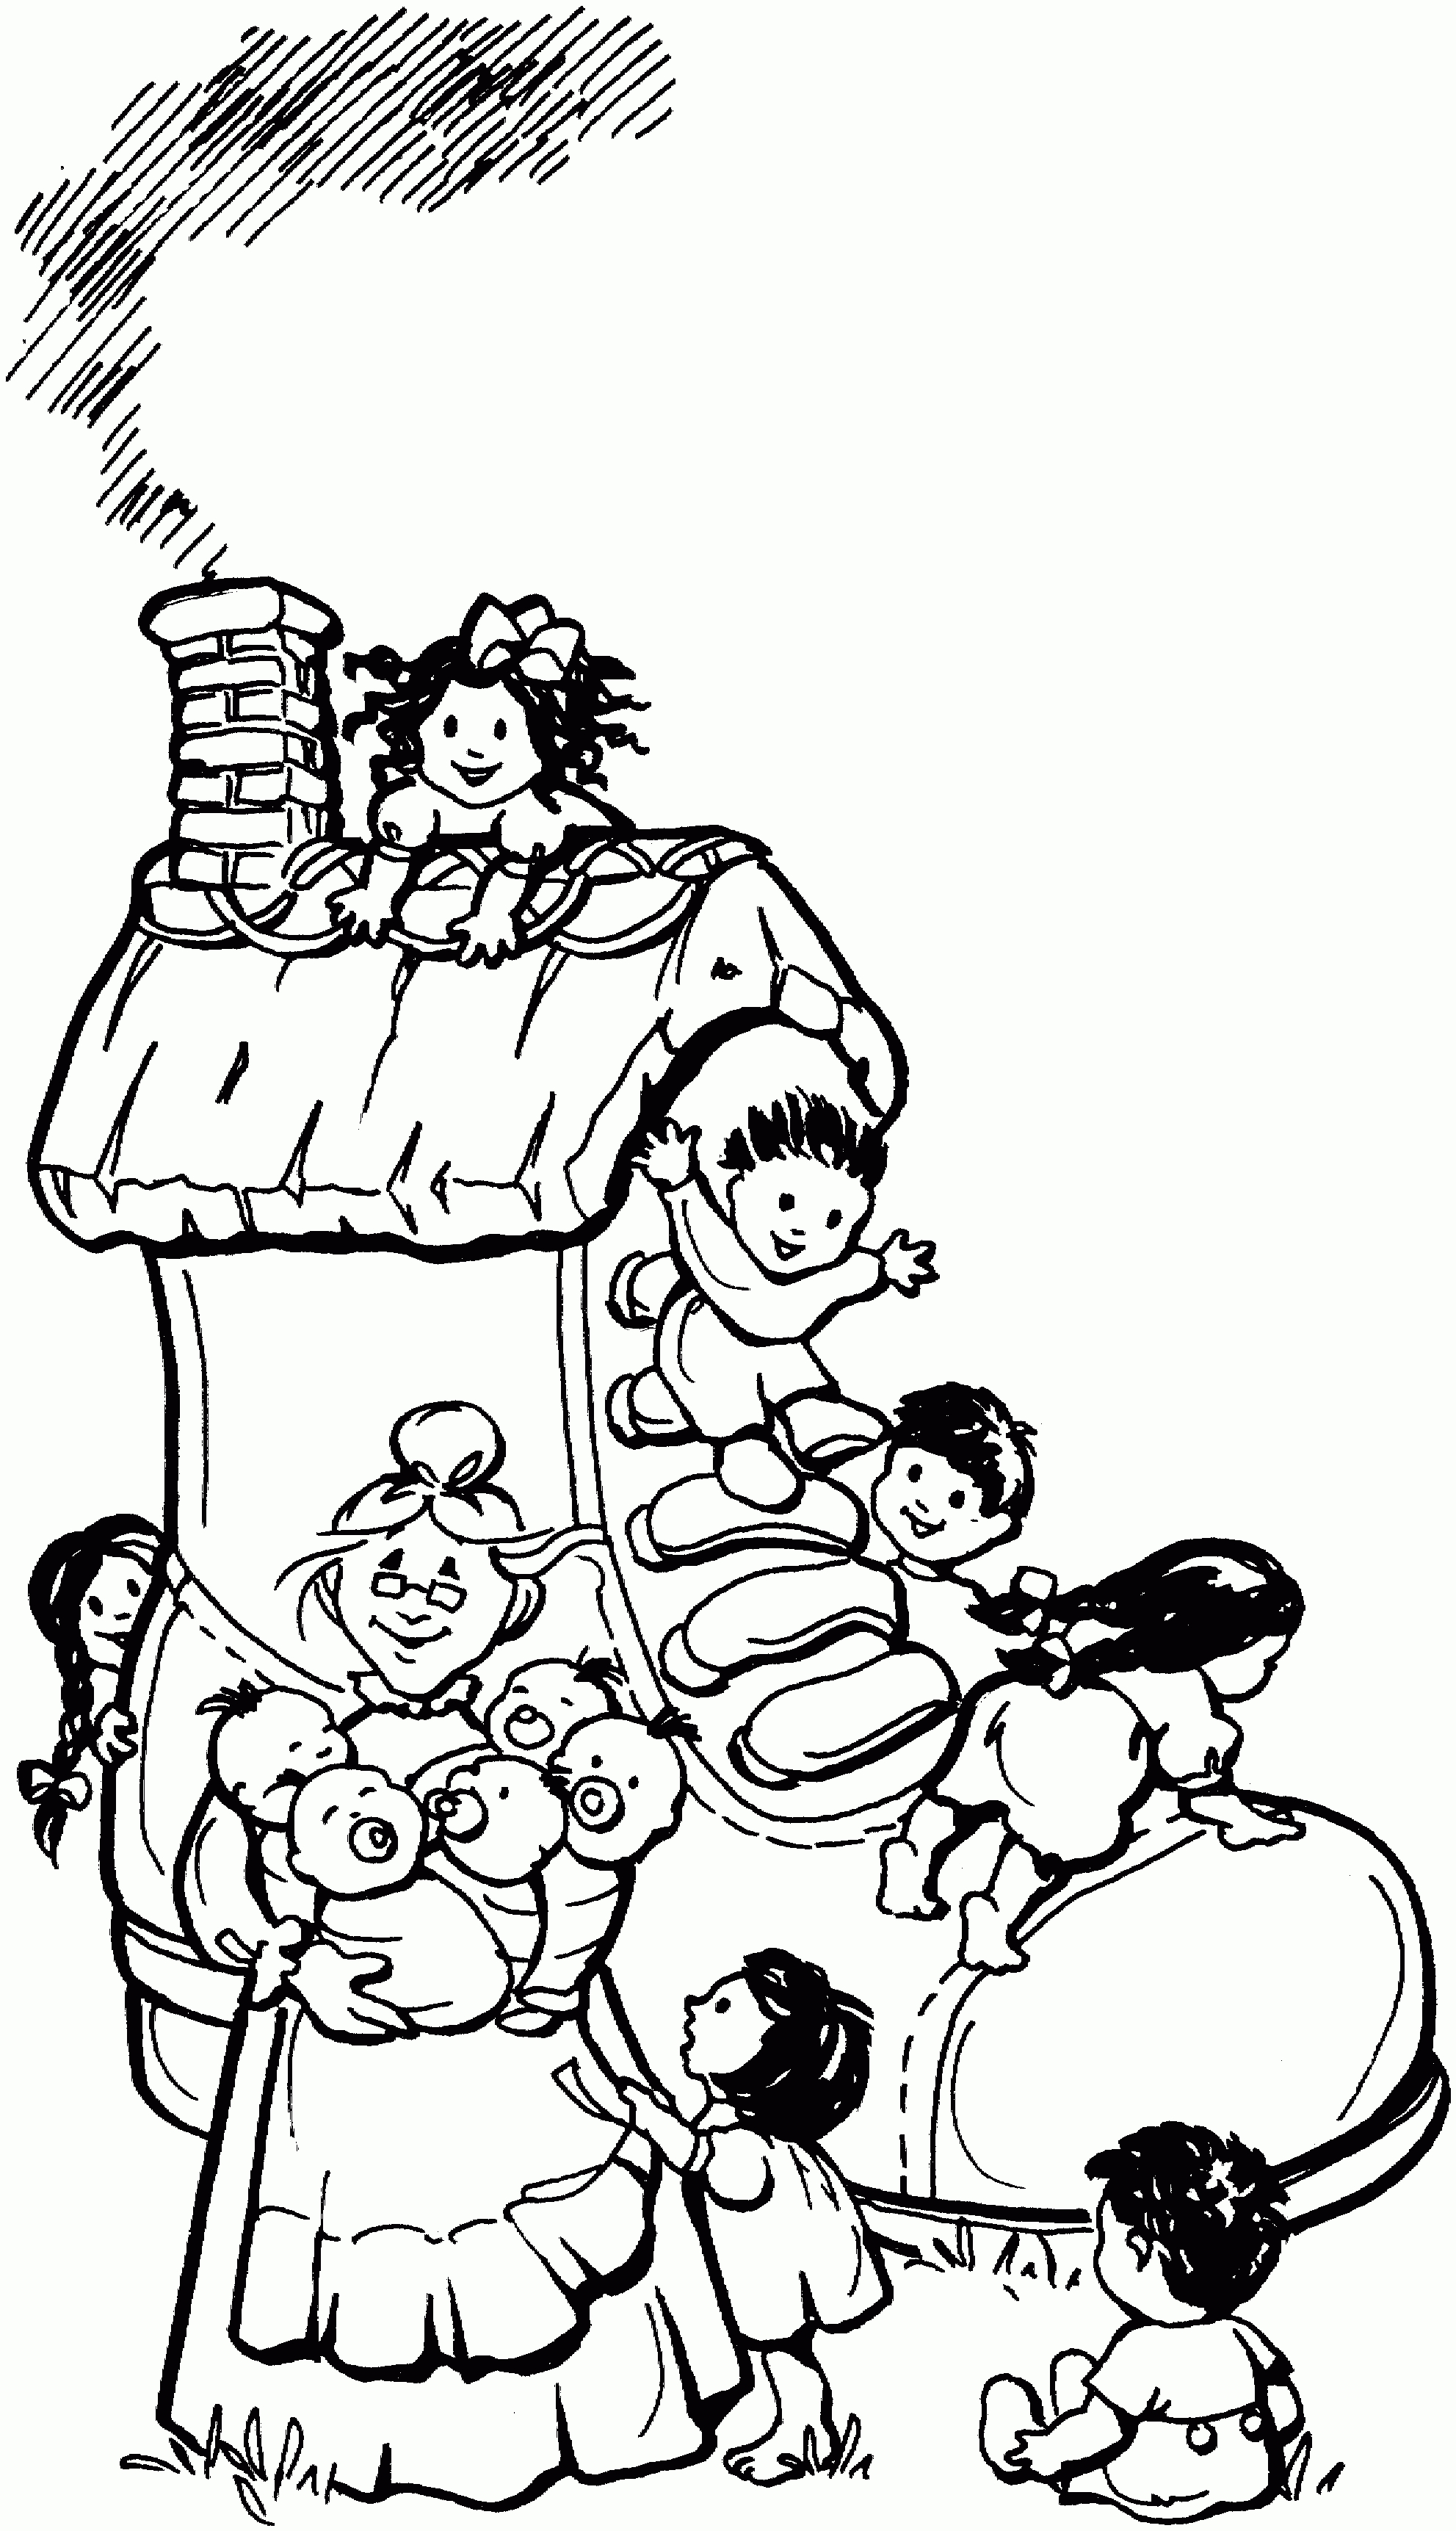 Nursery-Rhymes-Coloring-Pages-To-Print.gif (1983×3446) | Craft Ideas - Free Printable Nursery Rhyme Coloring Pages